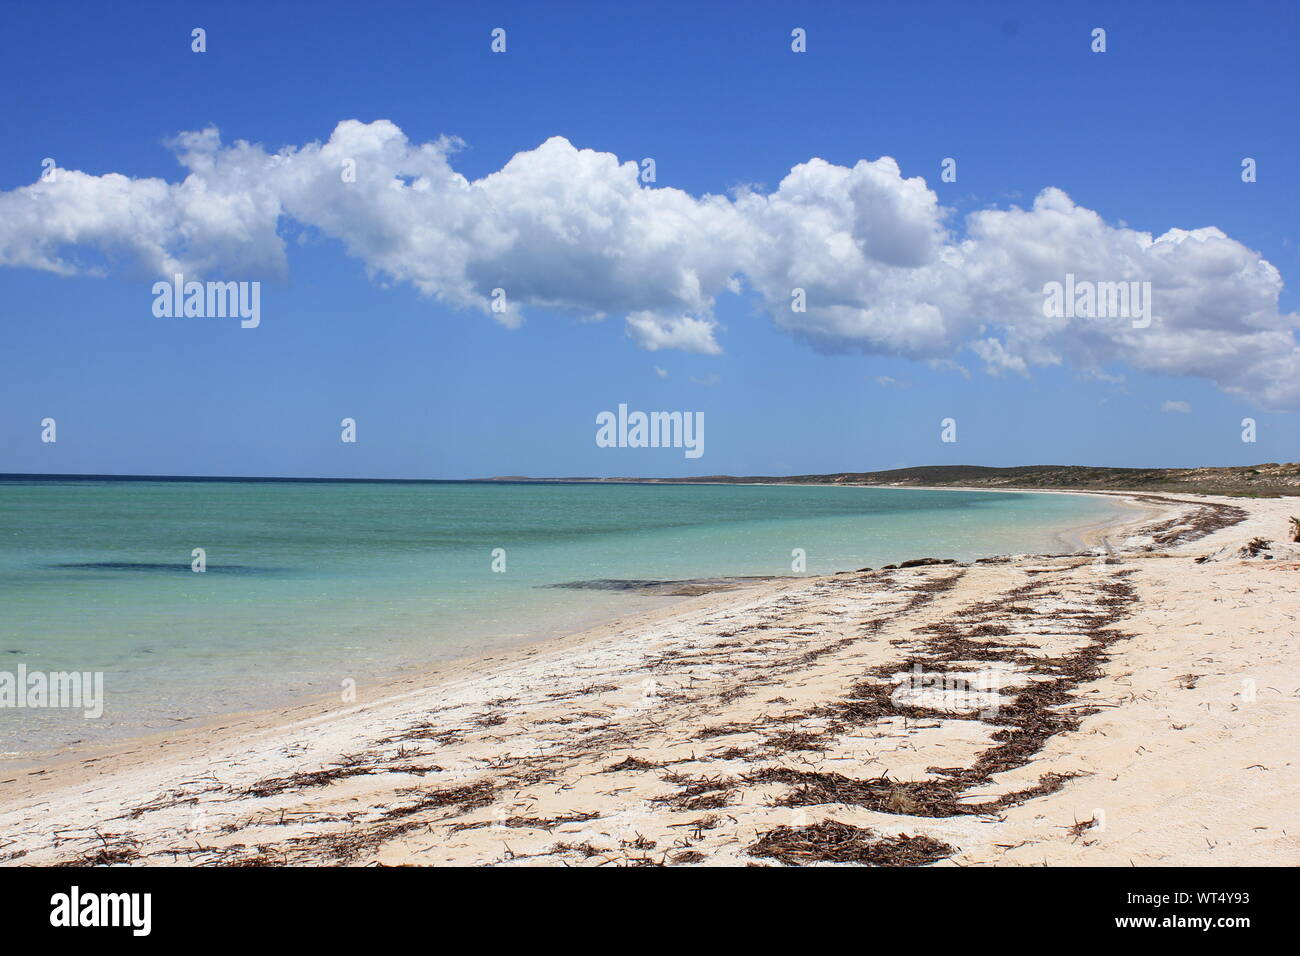 Shell beach in Shark Bay, Western Australia. Beach made of shells instead of sand, because of the high salinity, the mollusc live only for 18 months. Stock Photo